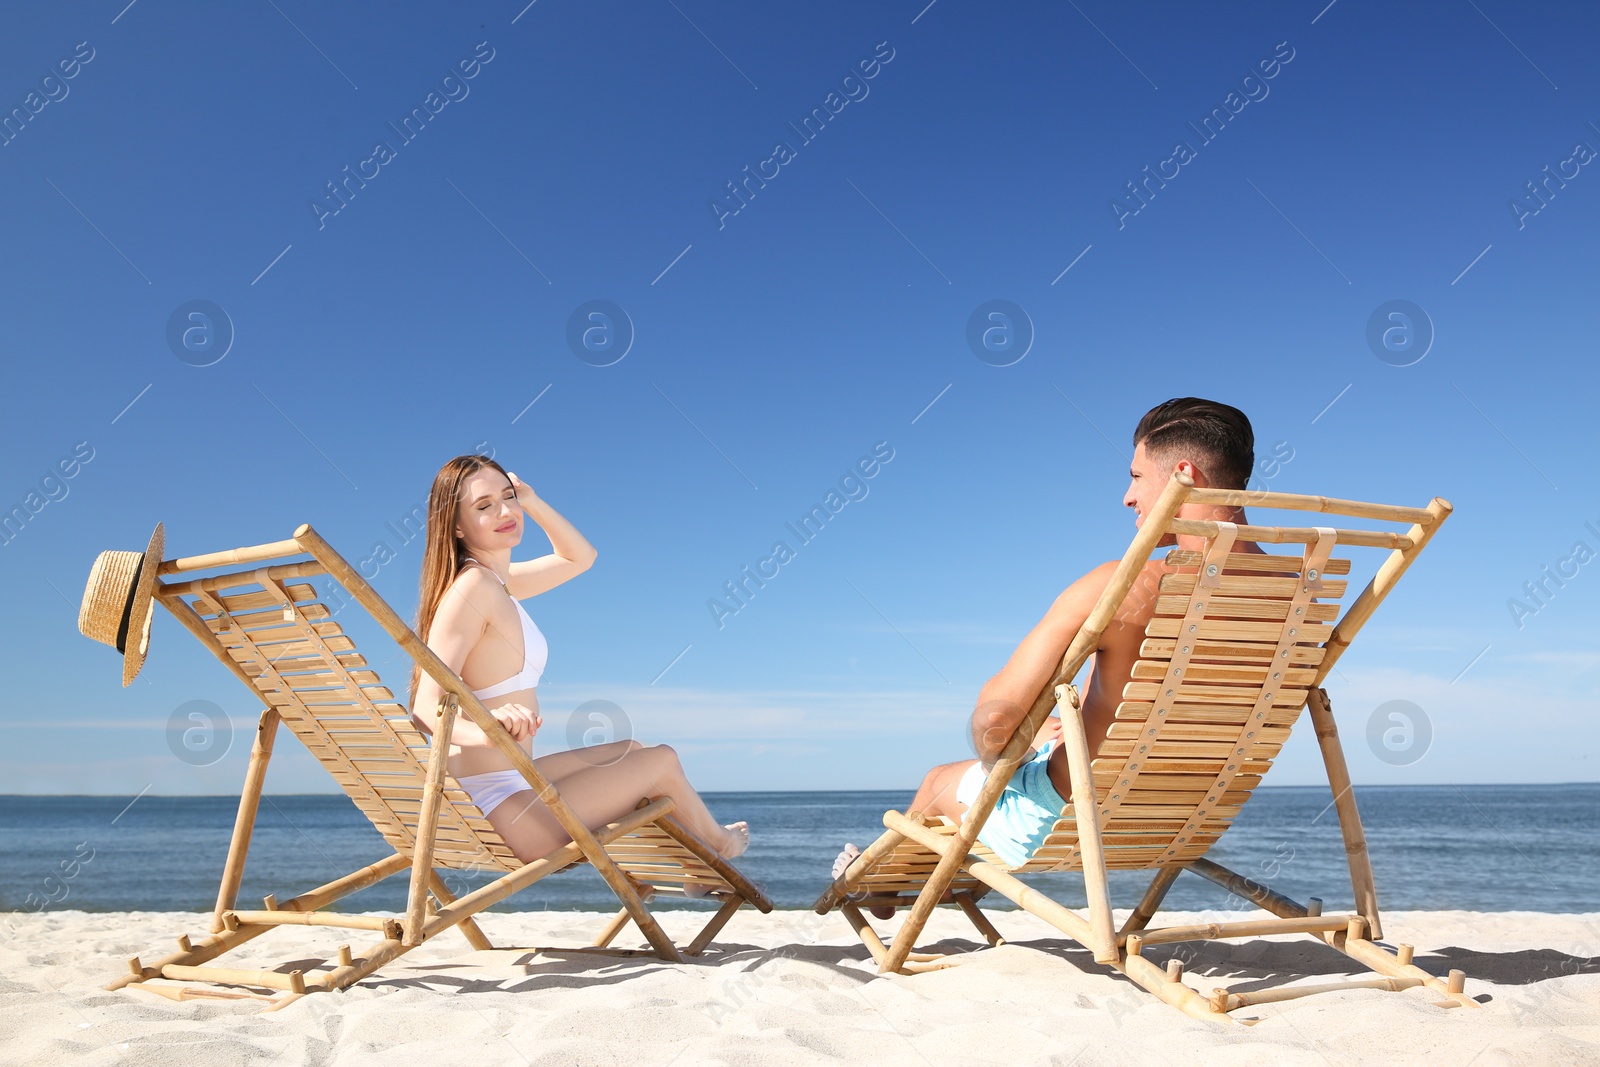 Photo of Woman in bikini and her boyfriend on deck chairs at beach. Happy couple